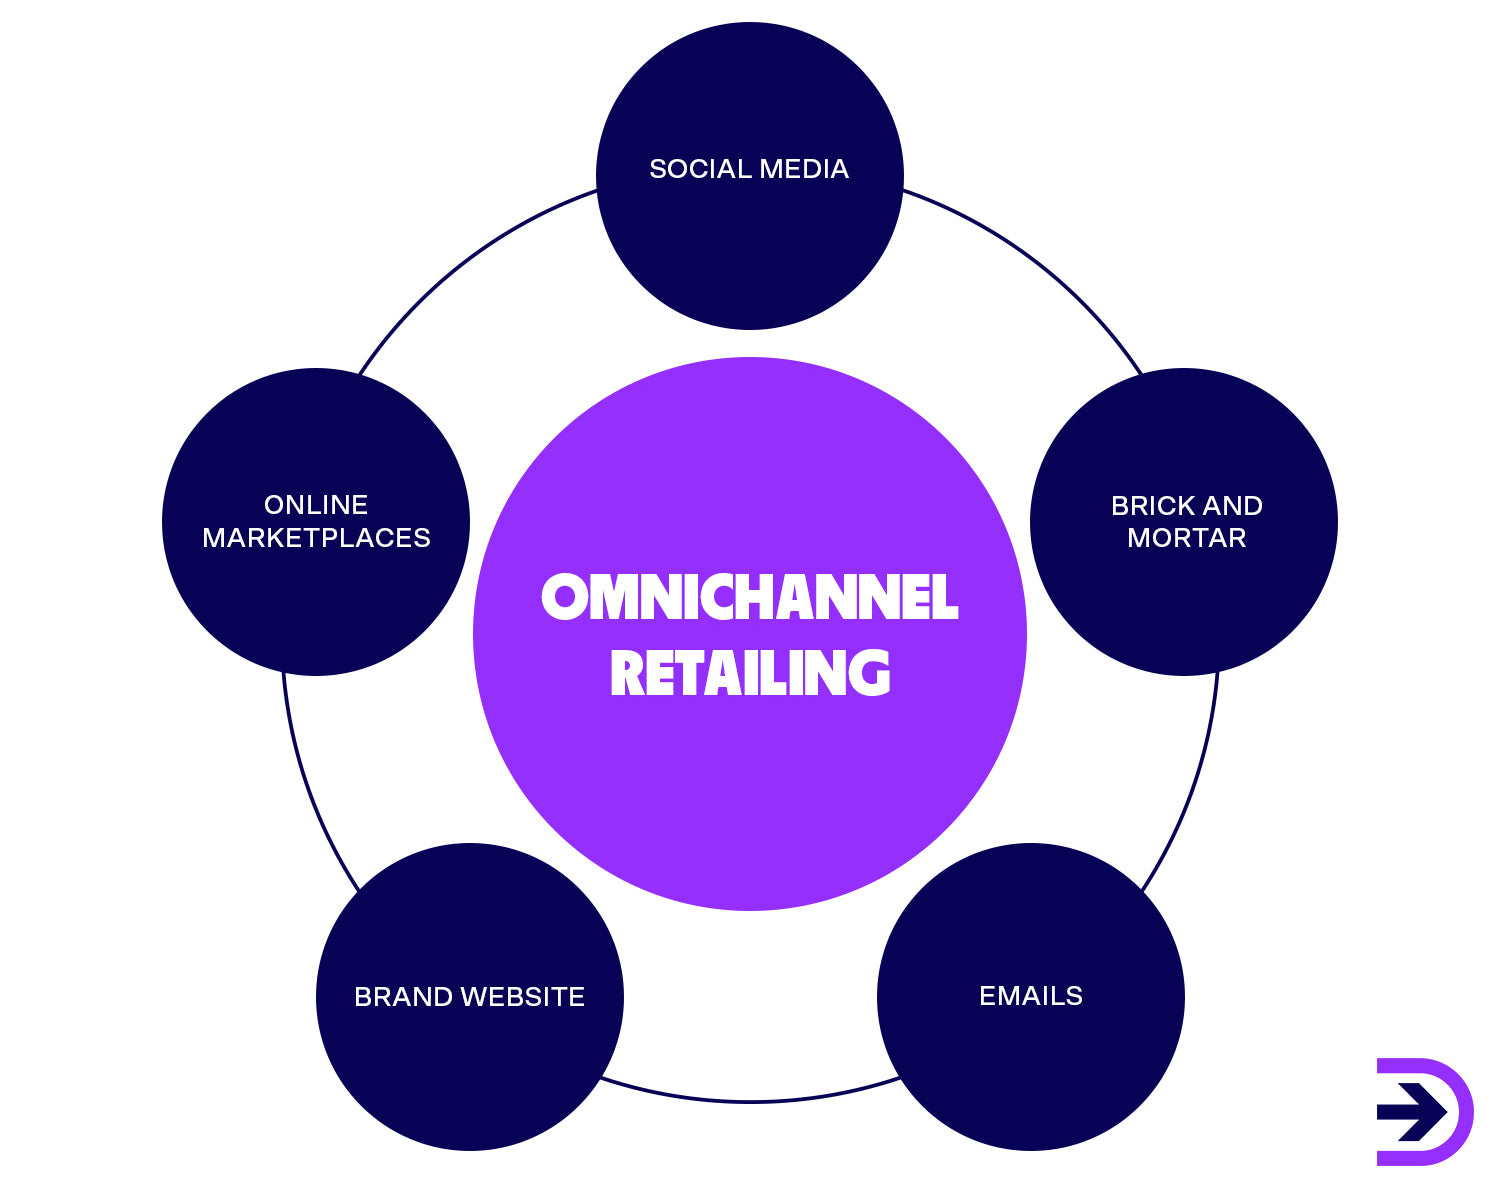 The five factors of omnichannel retailing: Social media, brick and mortar, emails, brand website and online marketplace.